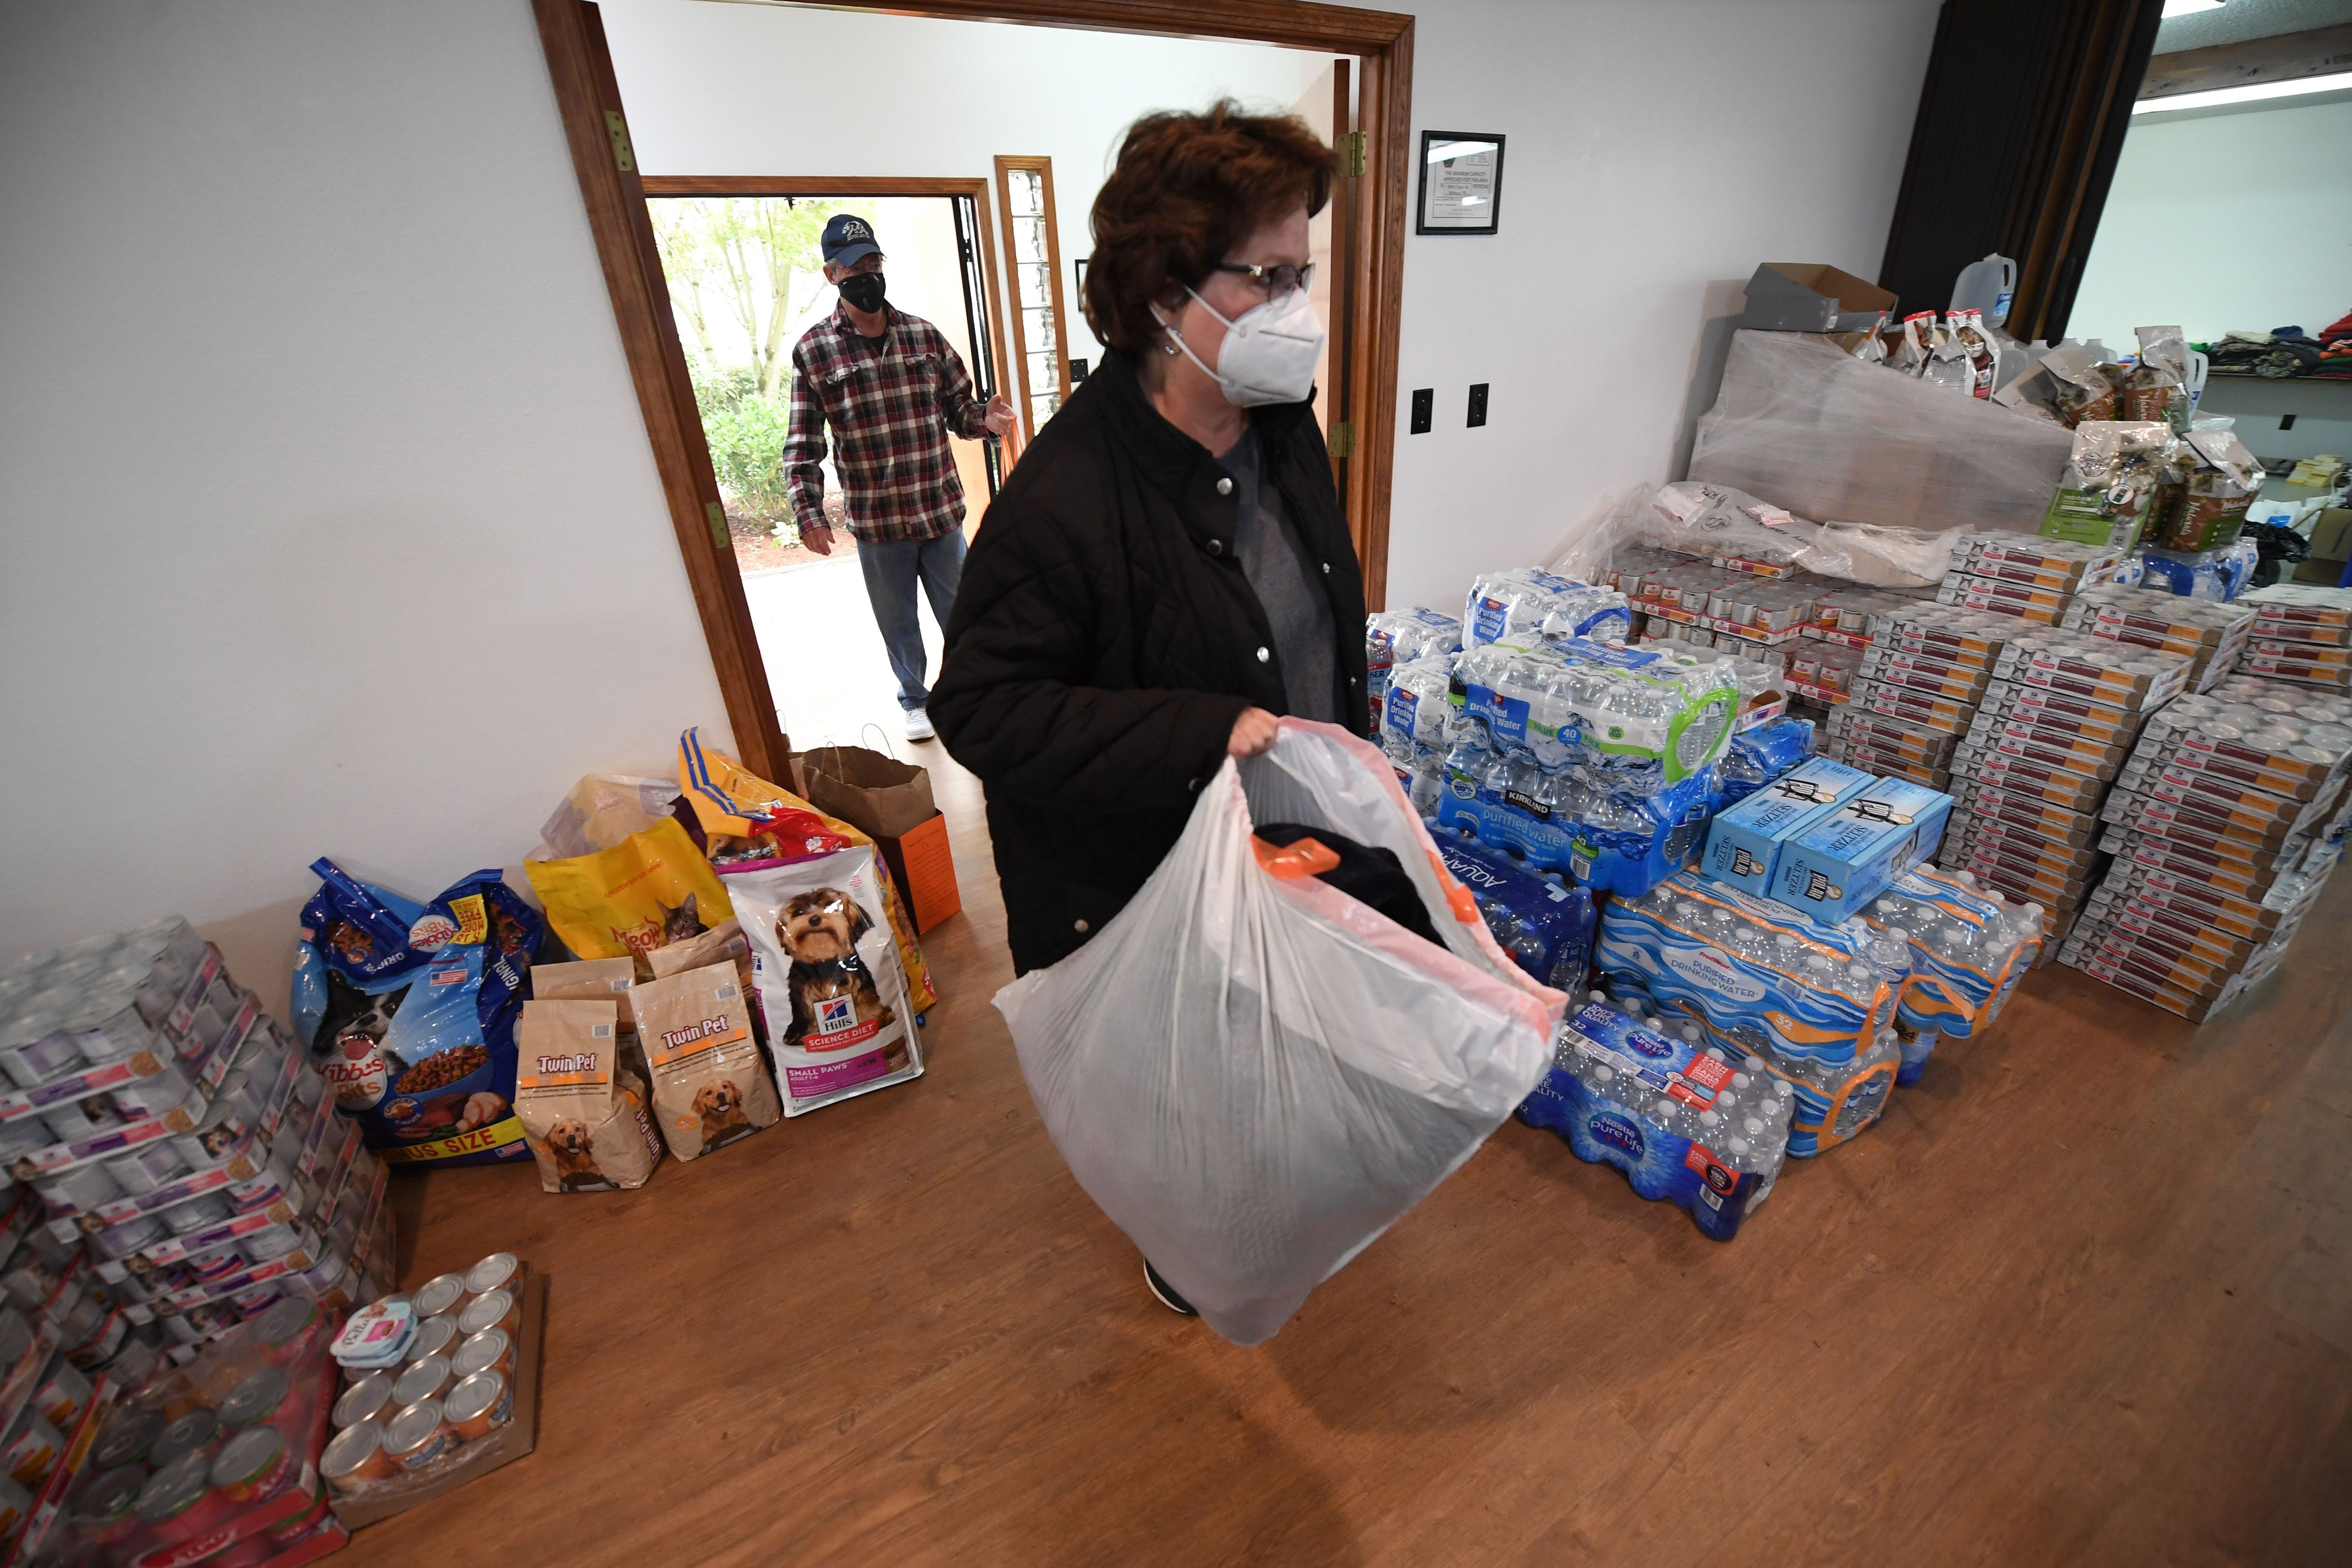 A woman drops off donations for residents evacuated from the Riverside Fire, one of many wildfires burning across the Oregon, at the Clackamas County Fairgrounds in Canby, Oregon, September 13